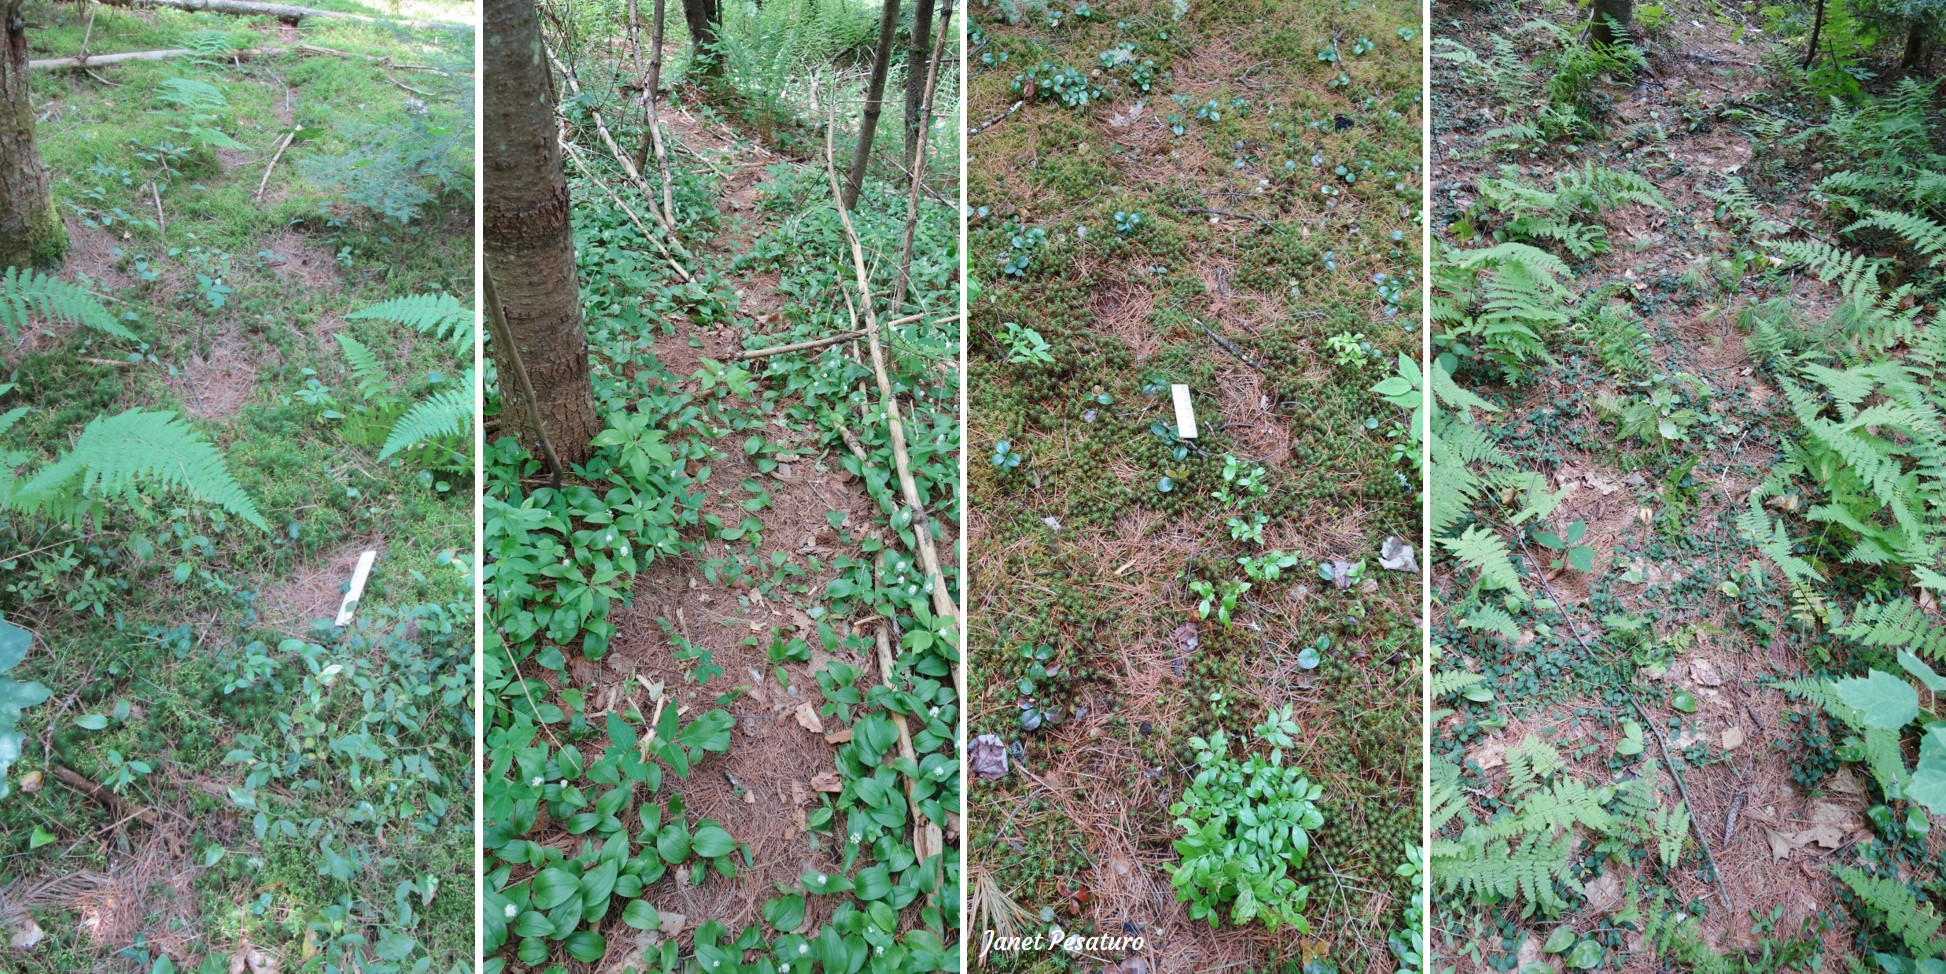 4 different black bear marking trails on green substrate